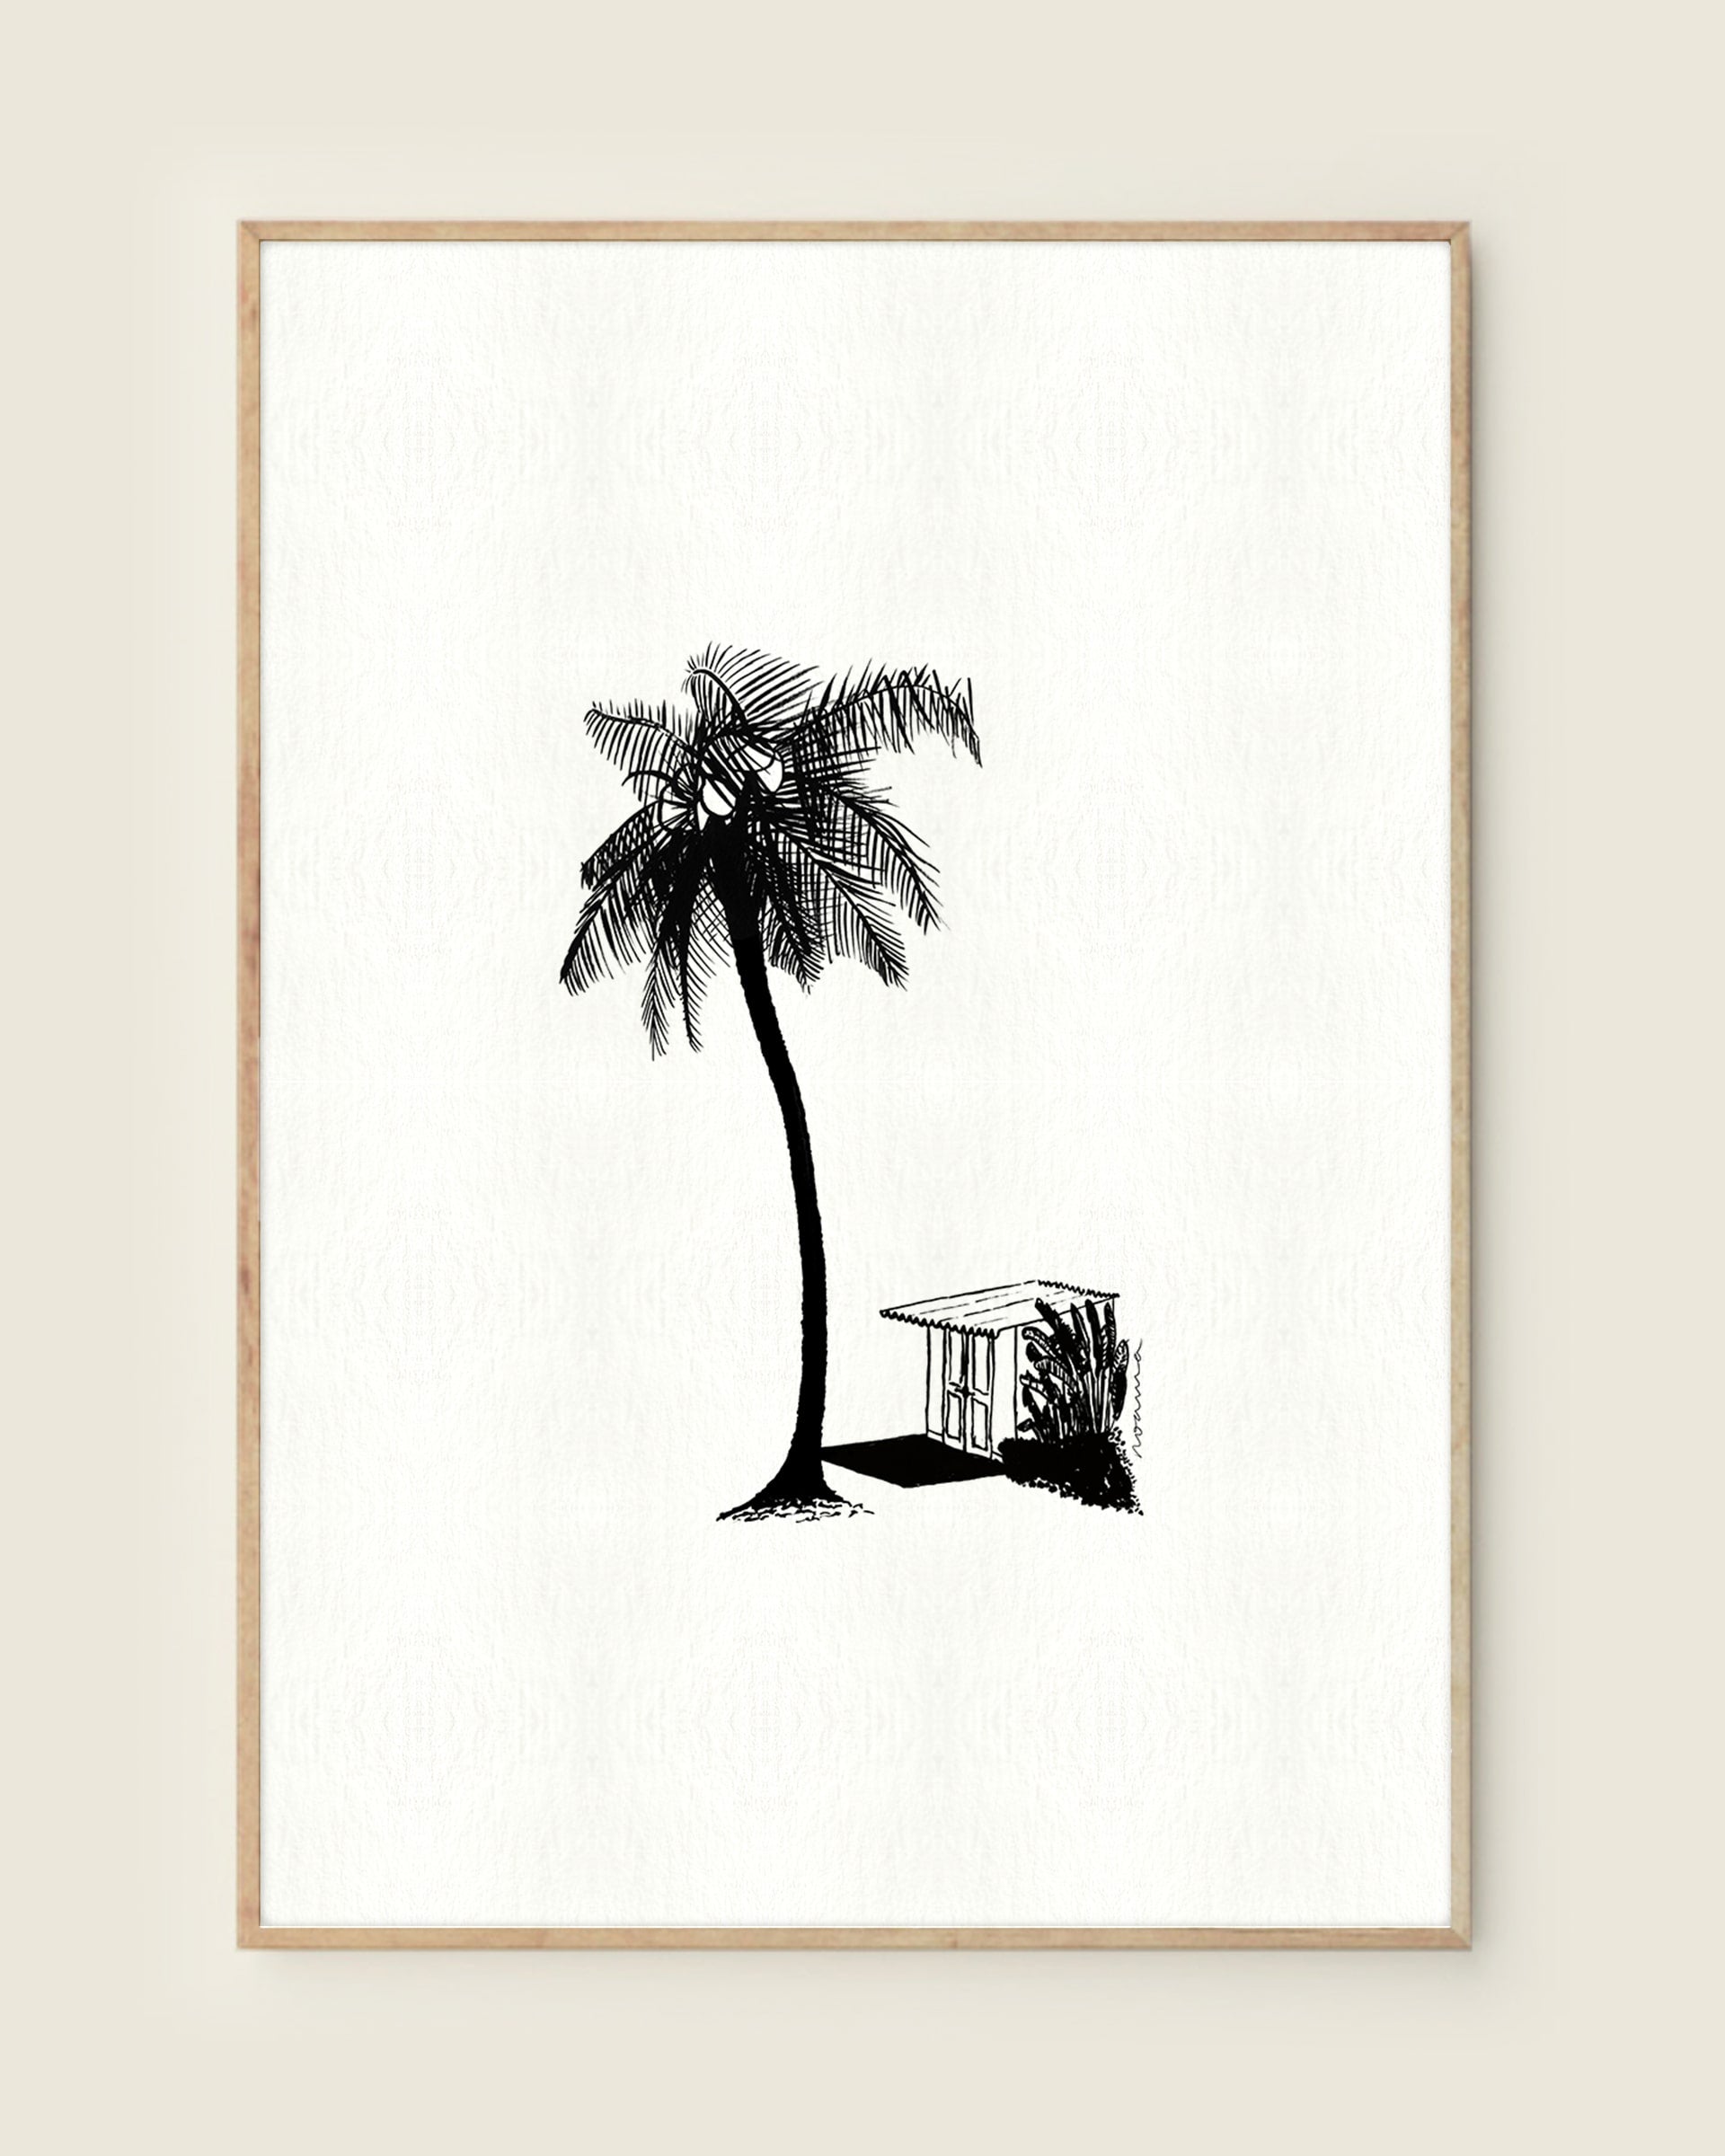 The King Coconut Tree & The Shed